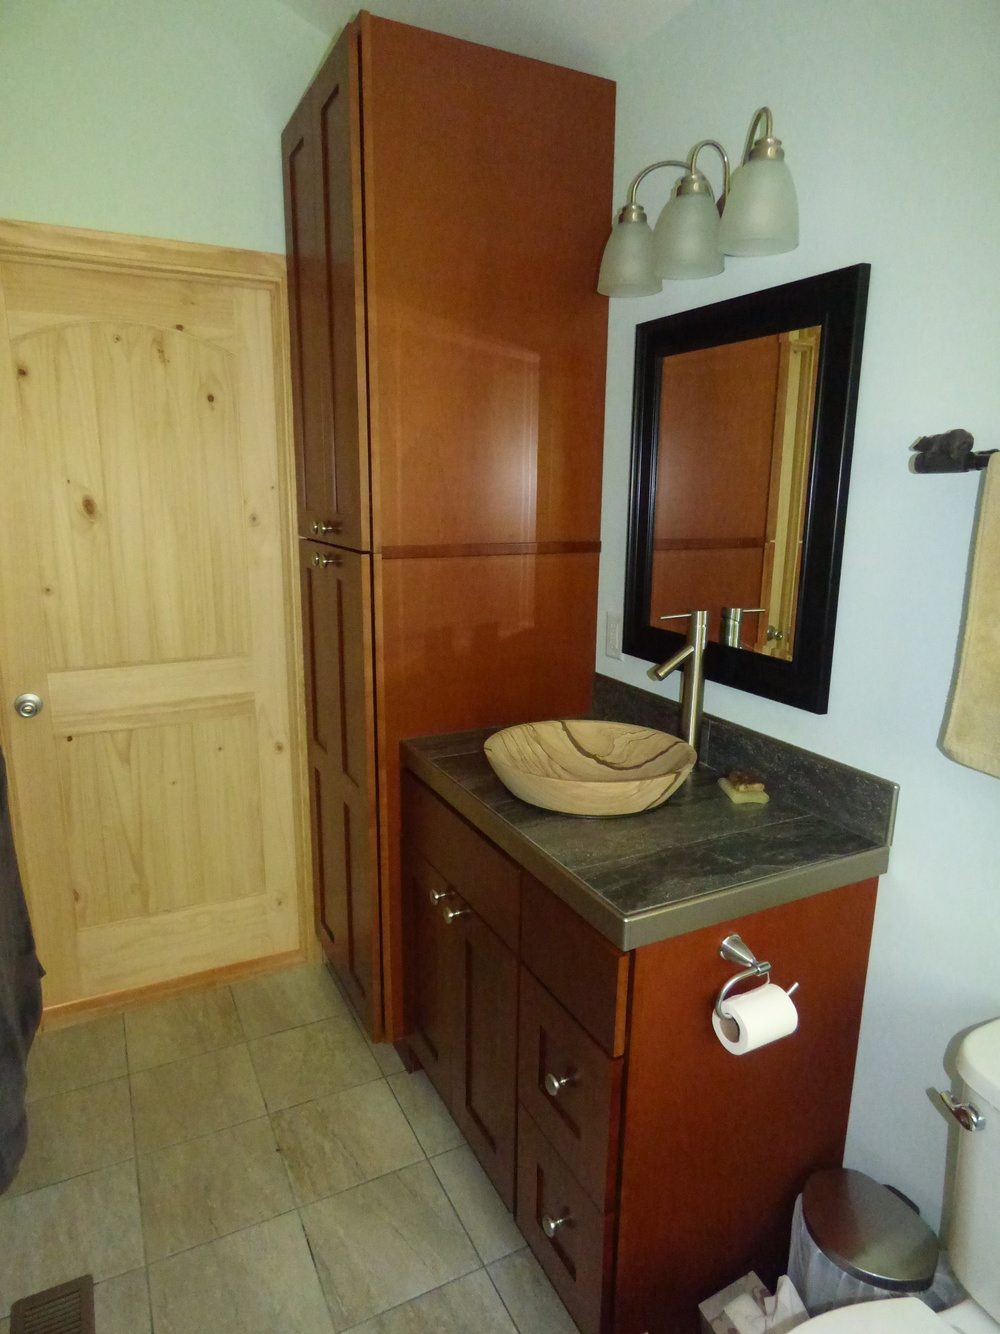 Bathroom with a ceramic sink which looks like a wooden one, and dark brown cabinets in toillette